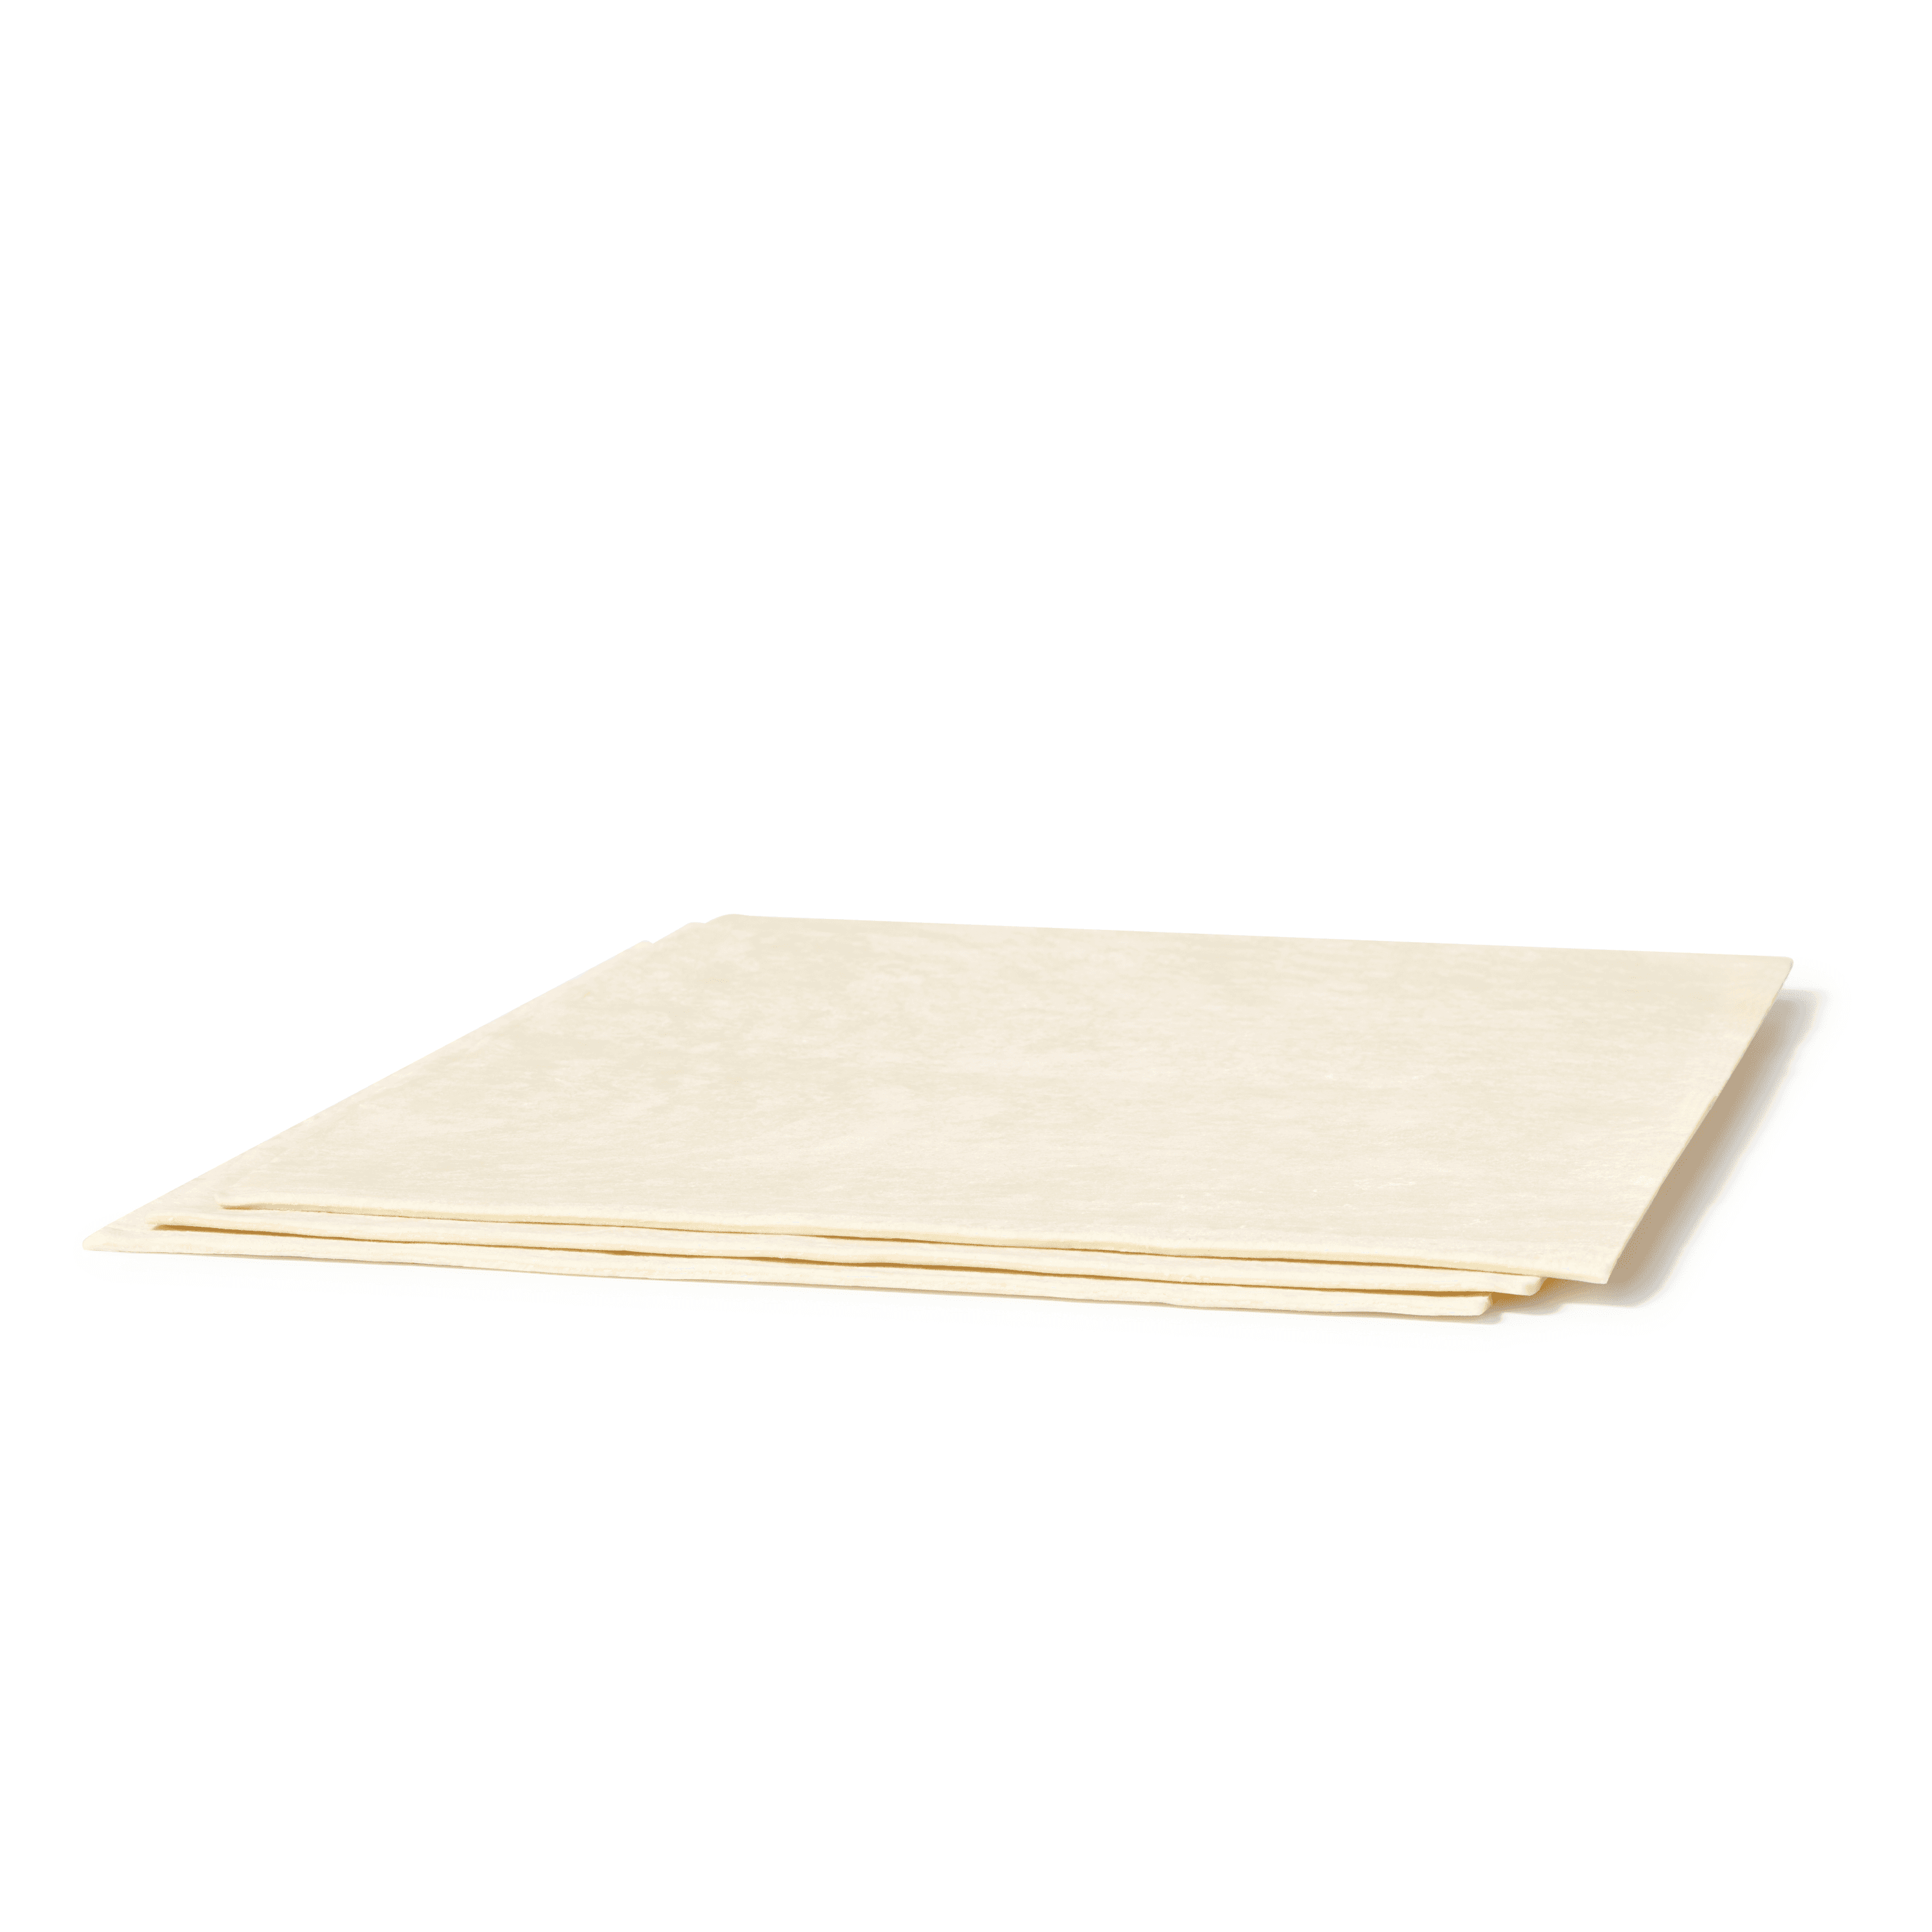 PSM16 puff pastry sheet side